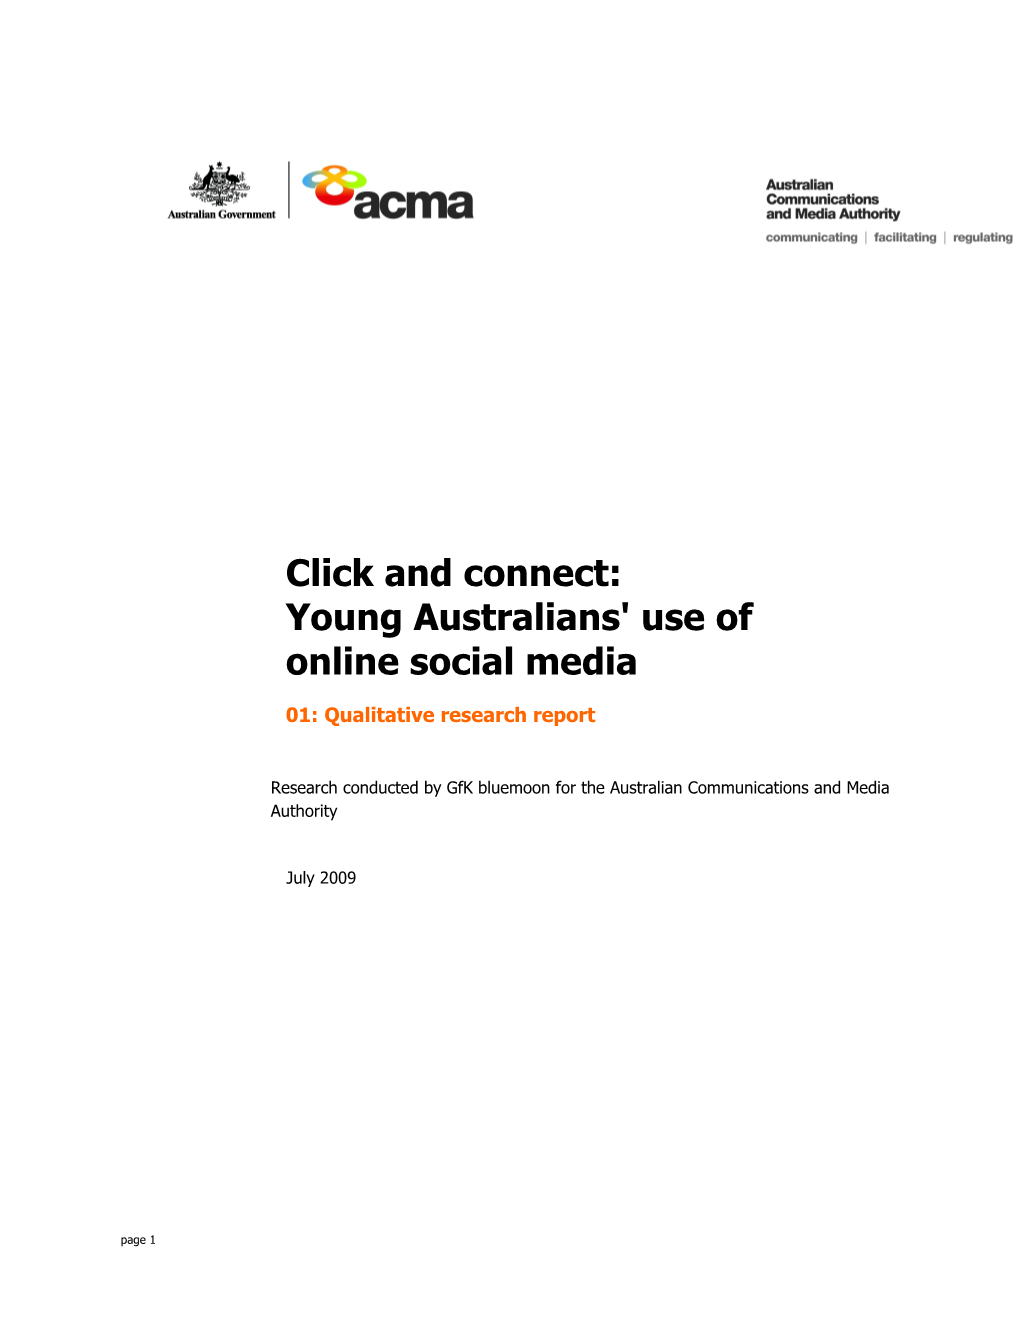 Click and Connect: Young Australians' Use of Online Social Media 01: Qualitative Research Report